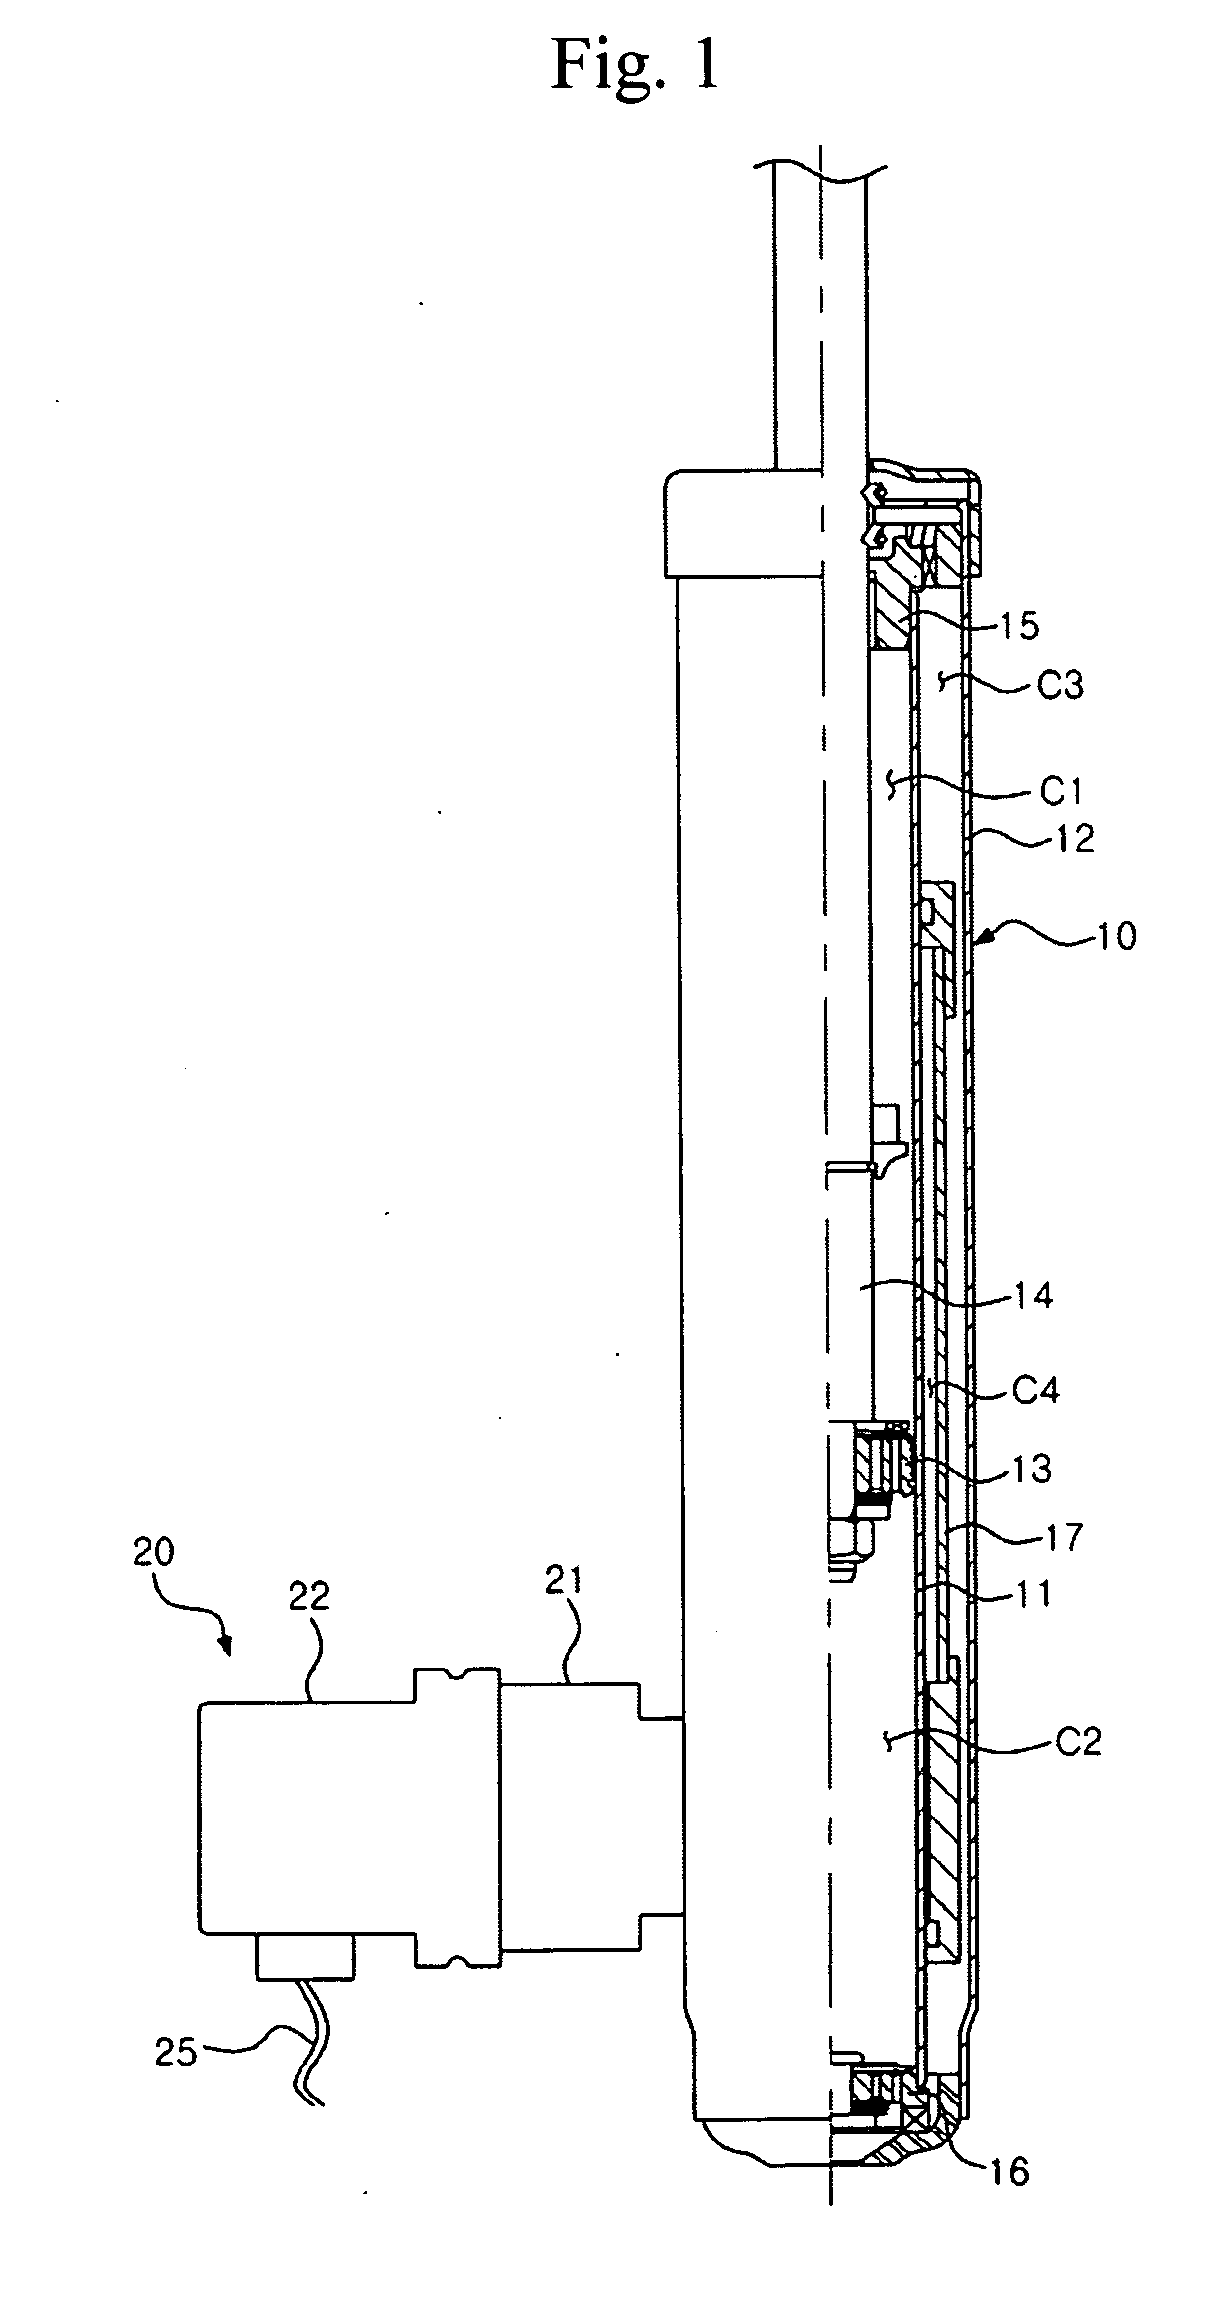 Solenoid valve assembly of variable damping force damper and method of assembling the same